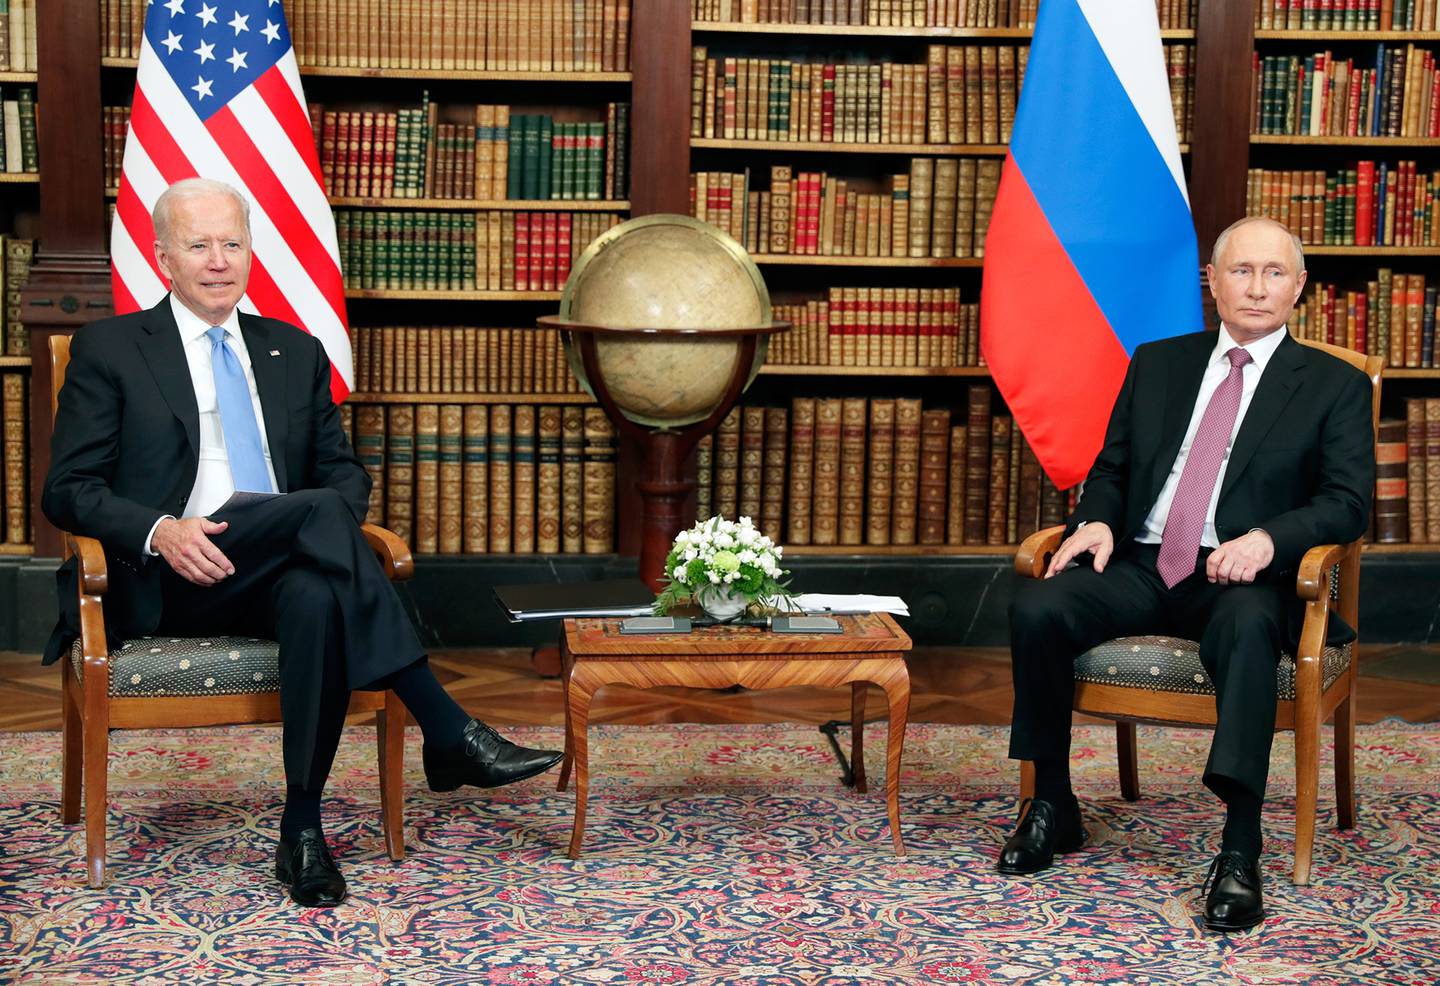 The leaders of the United States and Russia are seated with their nations' flags behind them in a library setting.